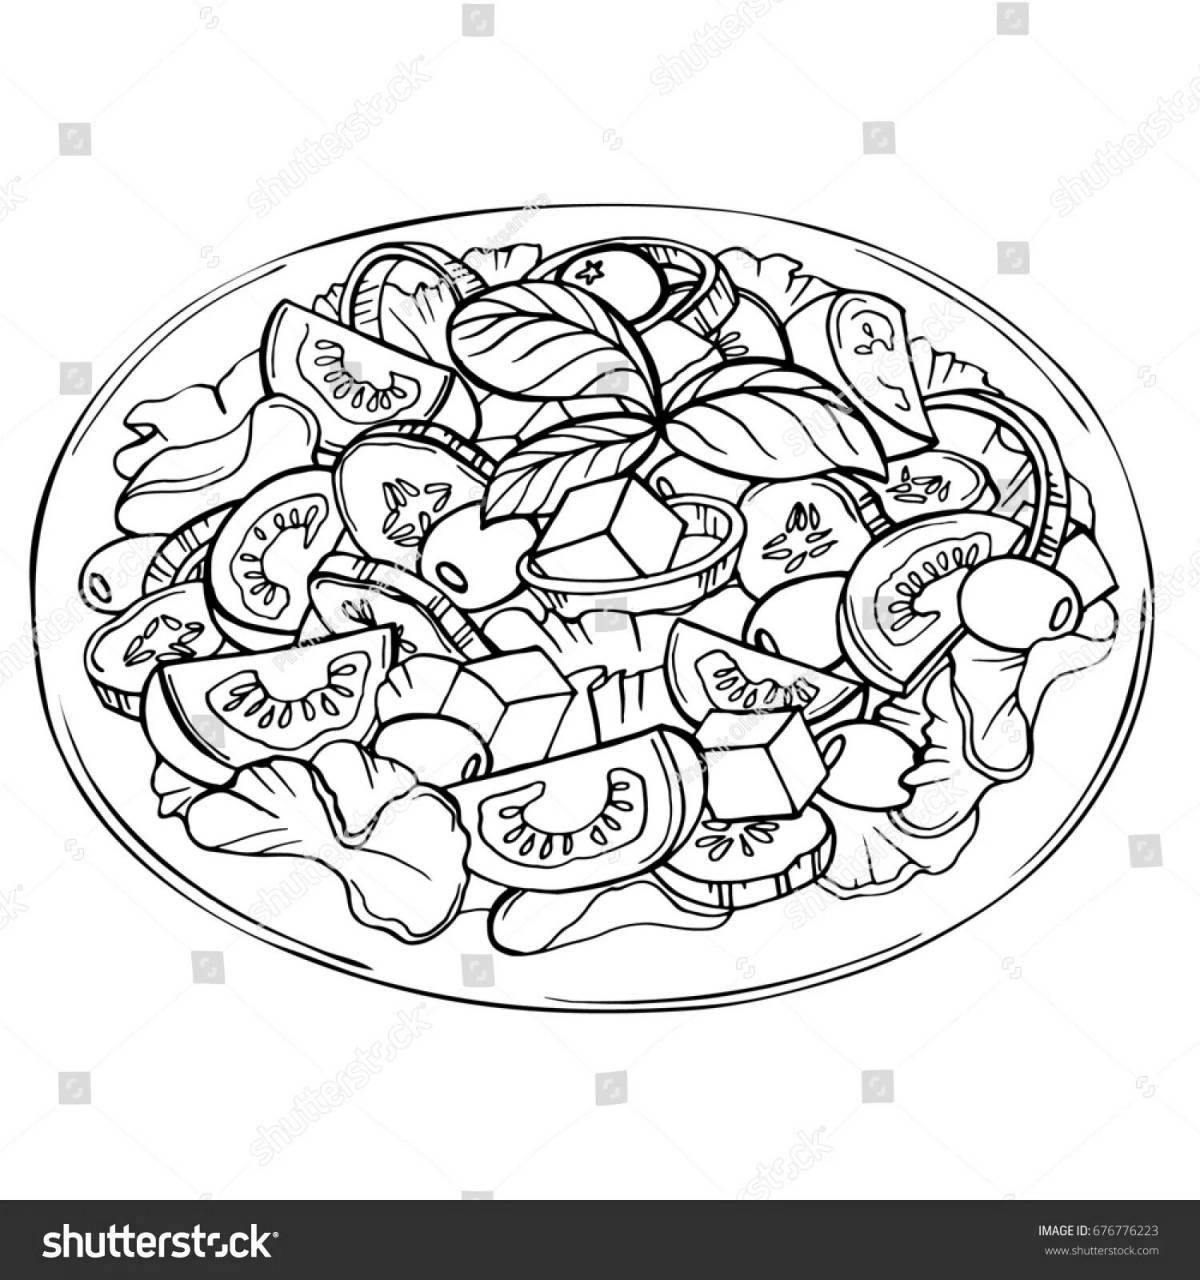 Olivier salad invitation in a plate